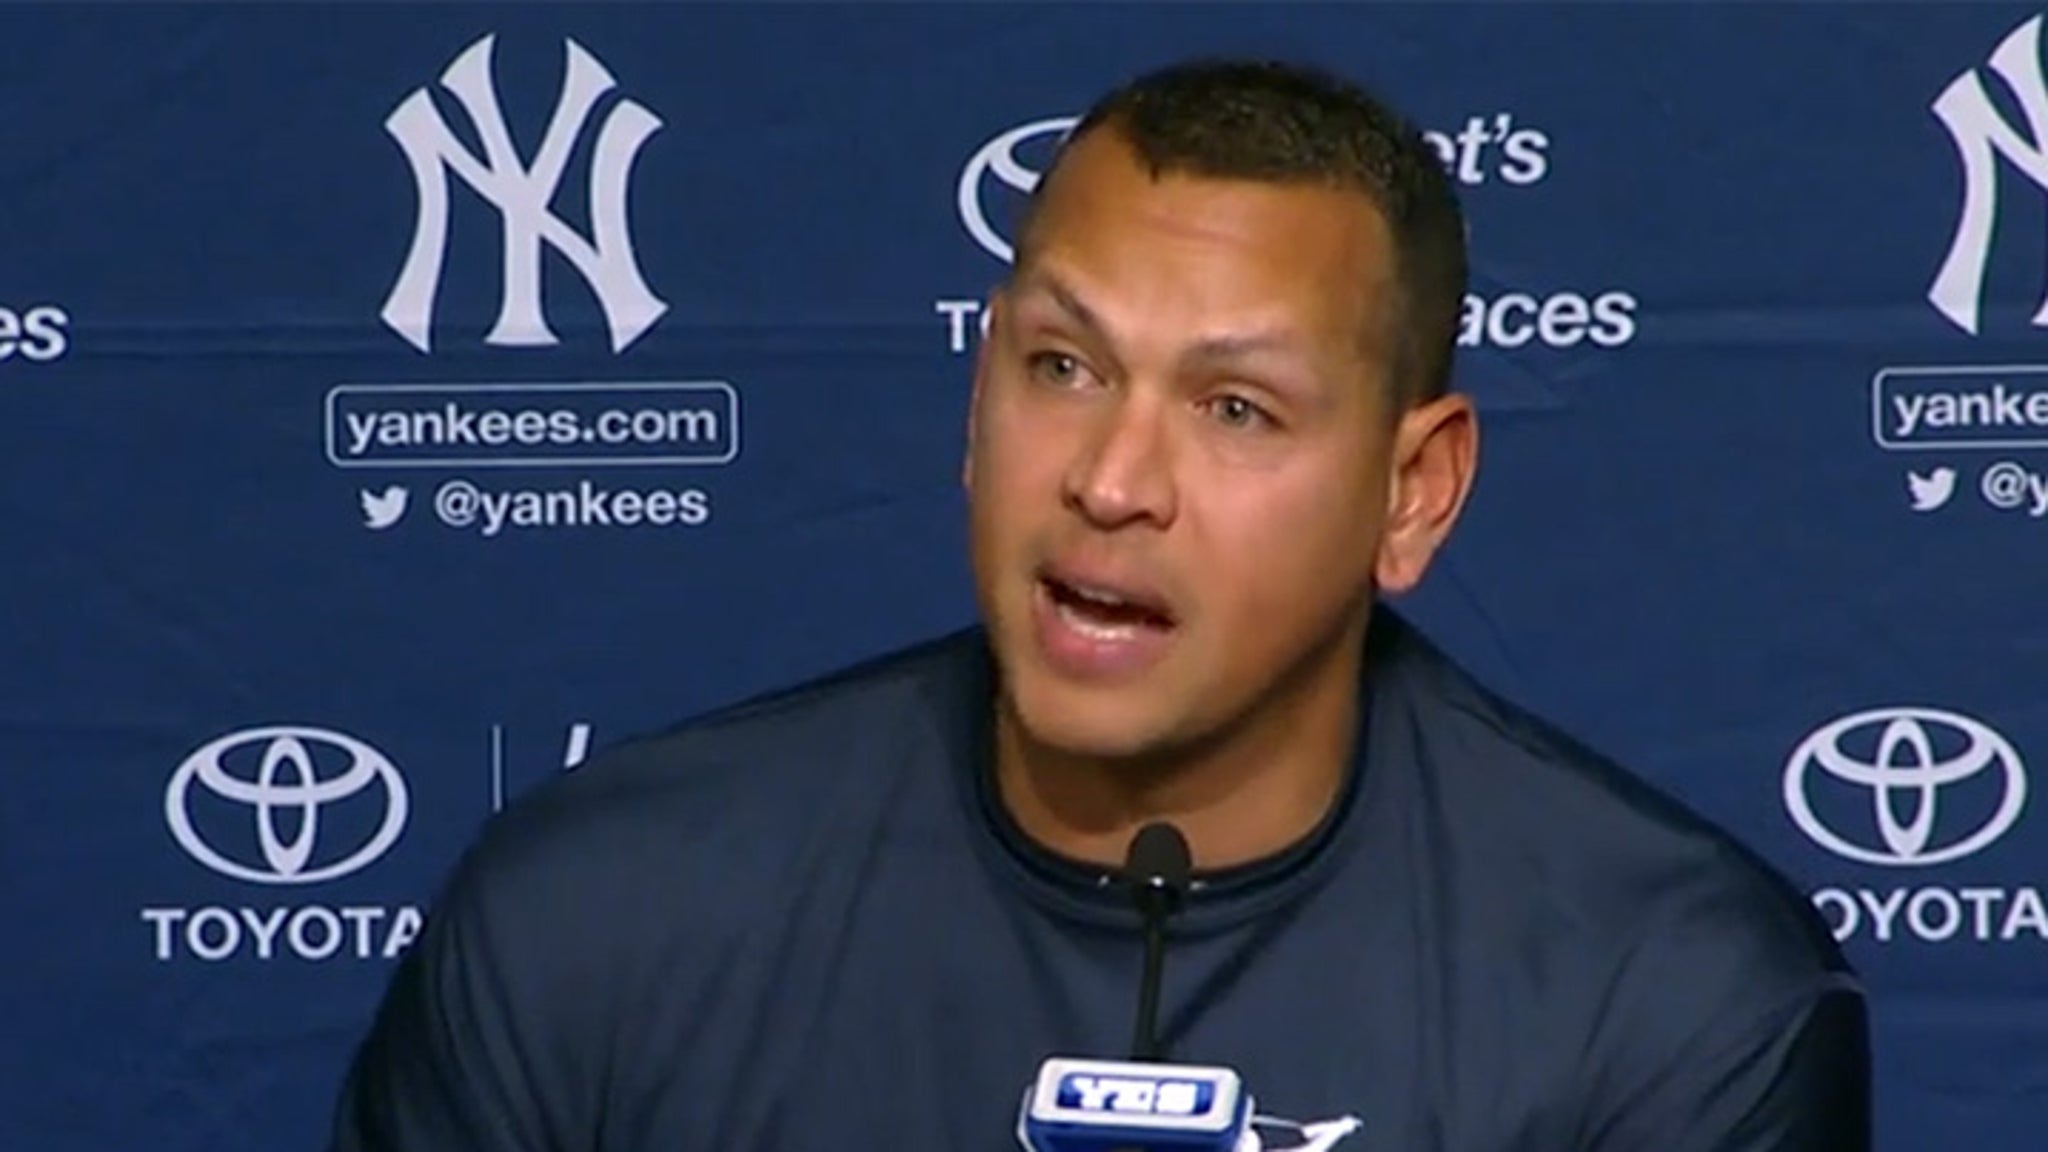 Alex Rodriguez: 'This Is a Tough Day' ... I'm Retiring